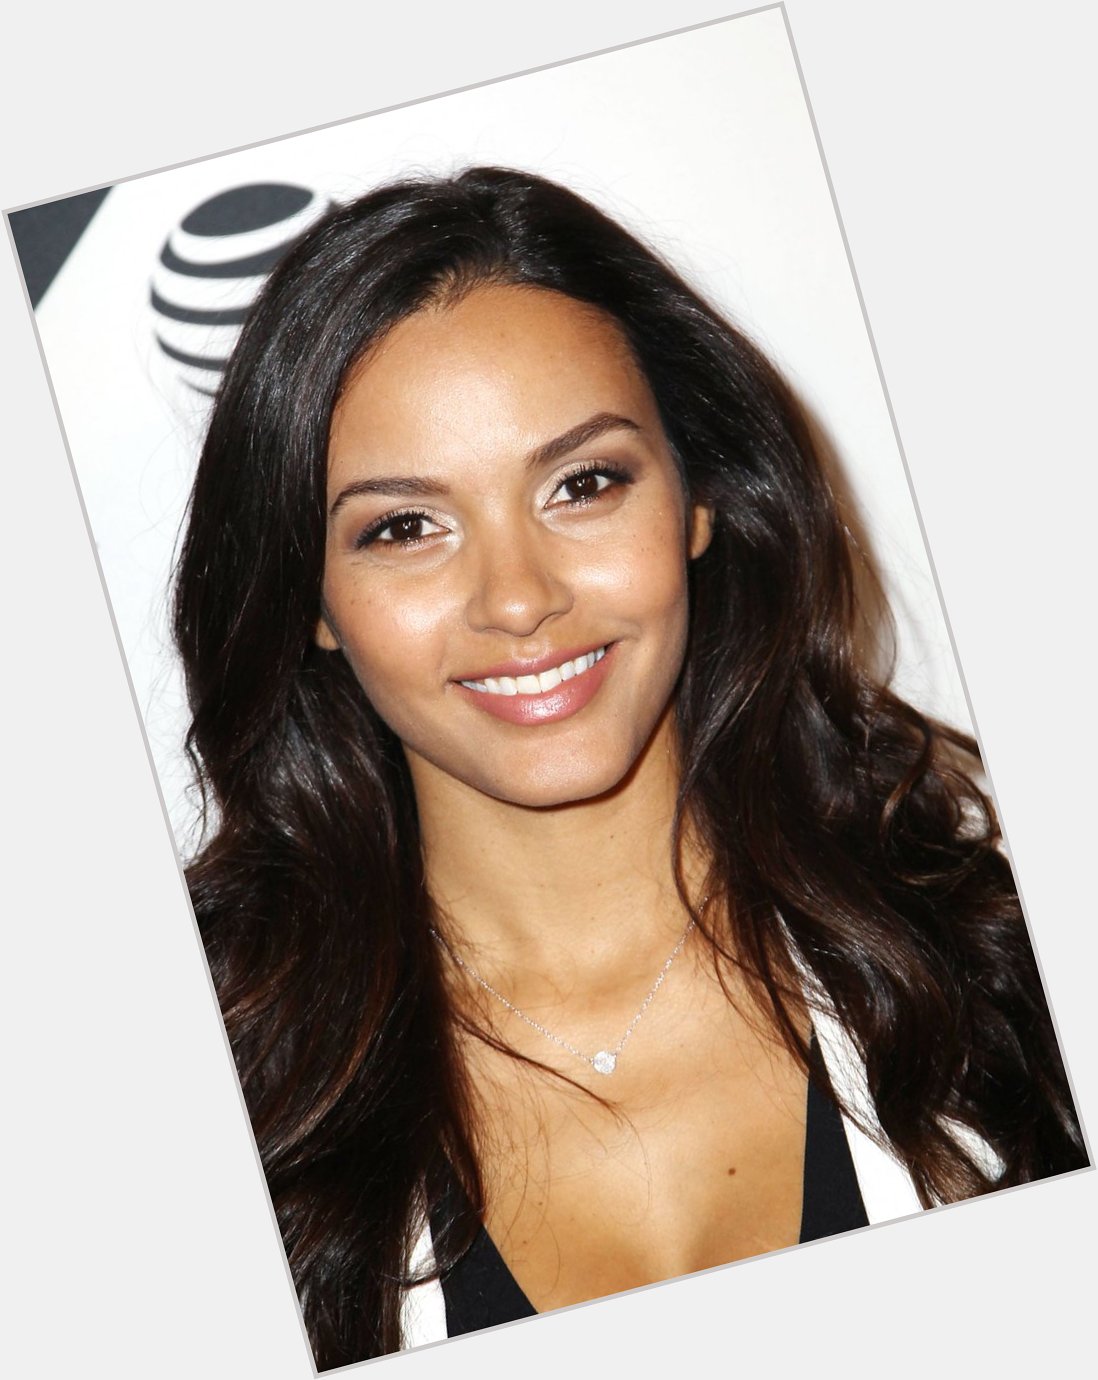 Happy 36th Birthday Shout Out to the lovely Gotham actress Jessica Lucas!!! 